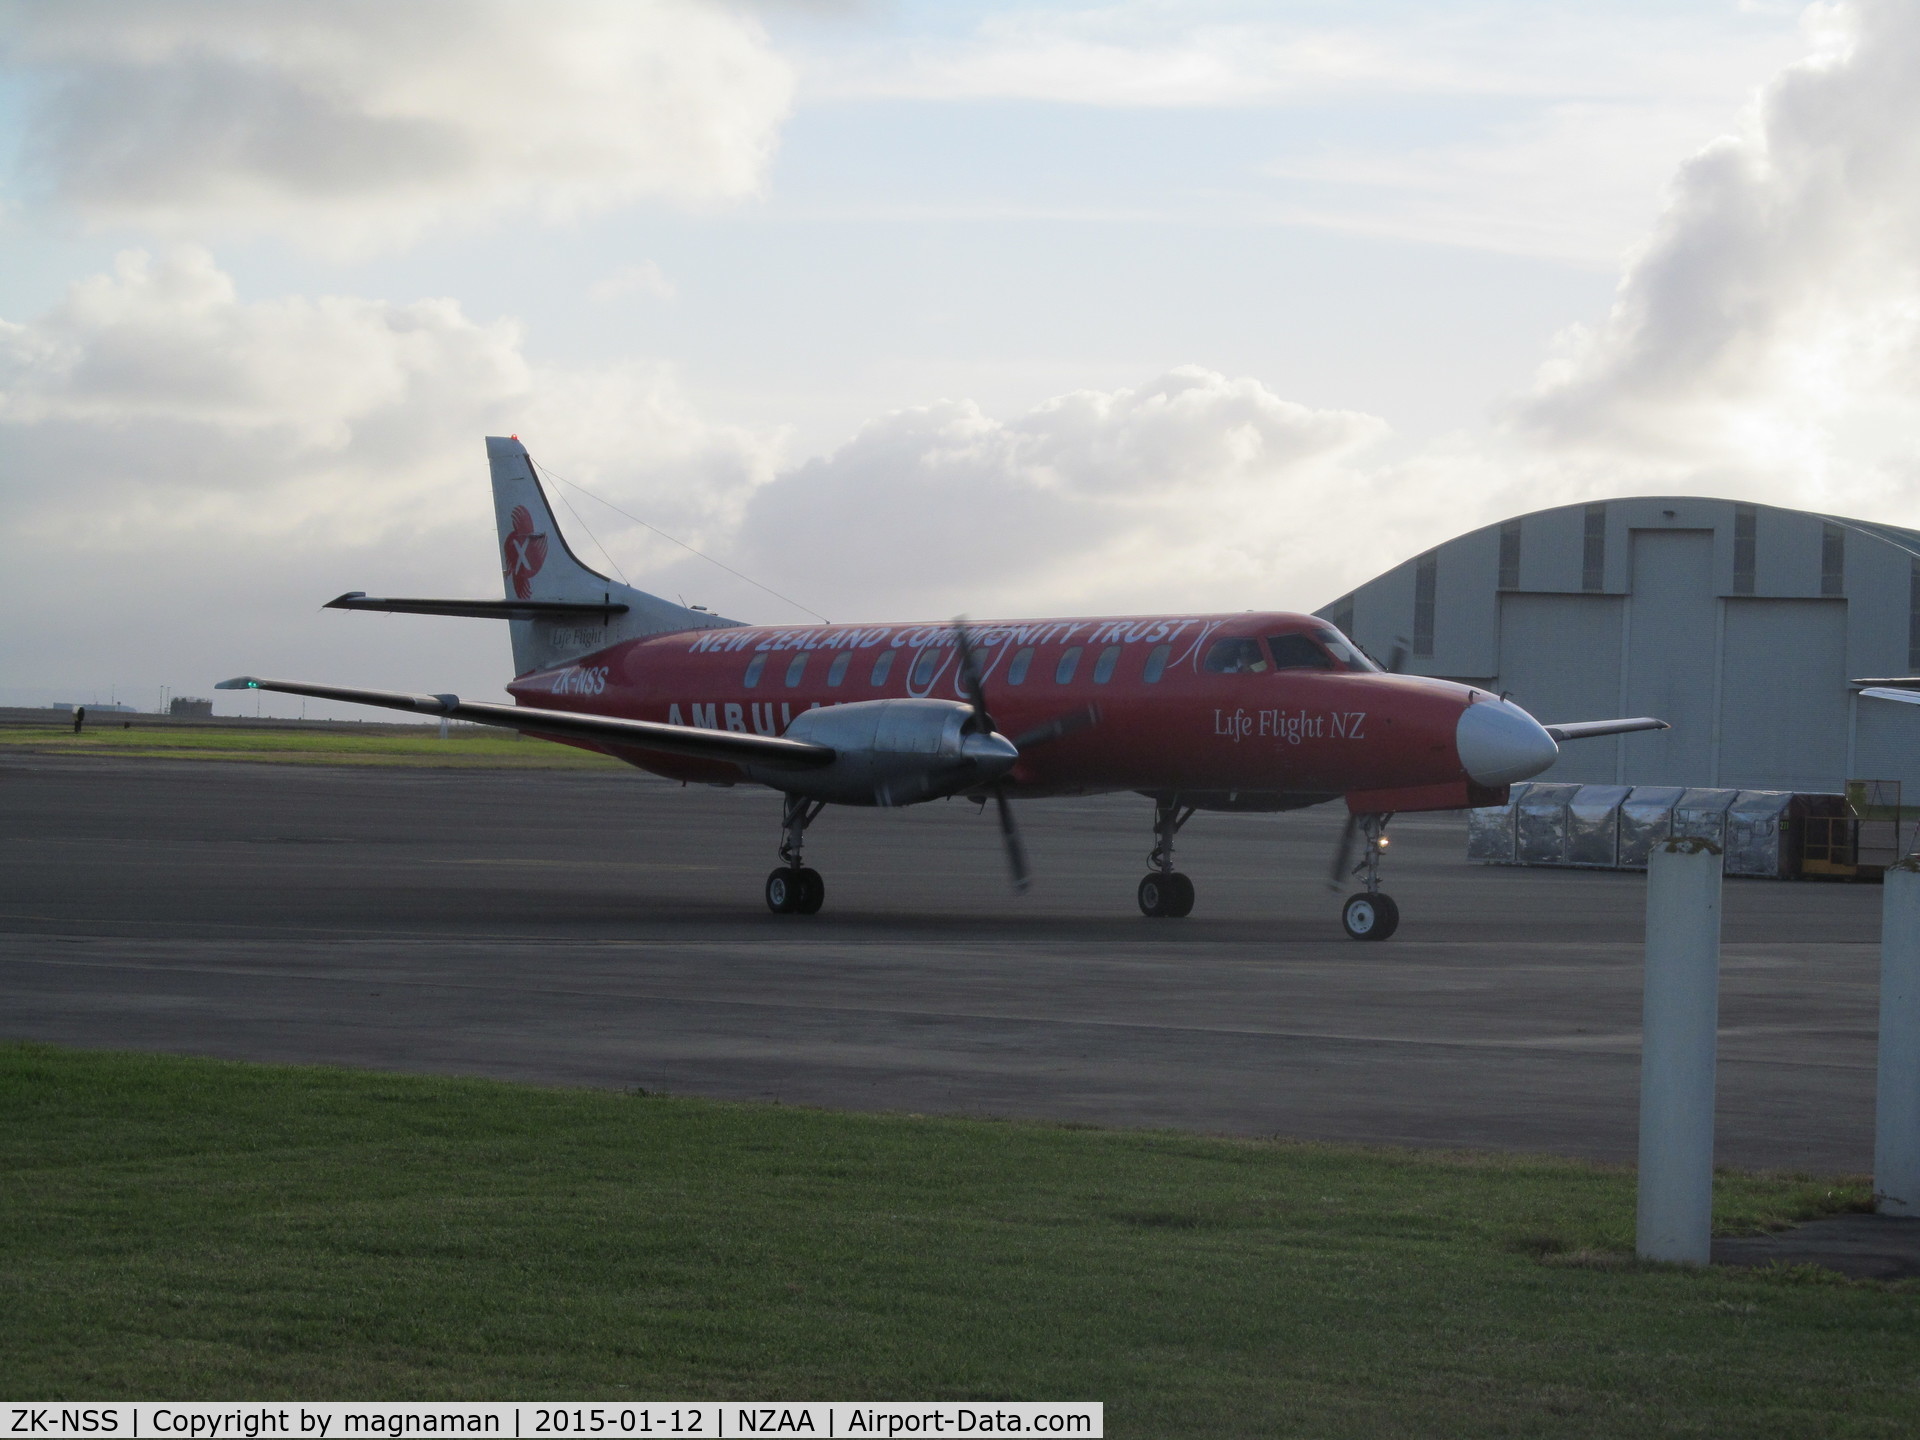 ZK-NSS, Fairchild SA-227AC Metro III C/N AC692, one of two based at AKL other is LFT